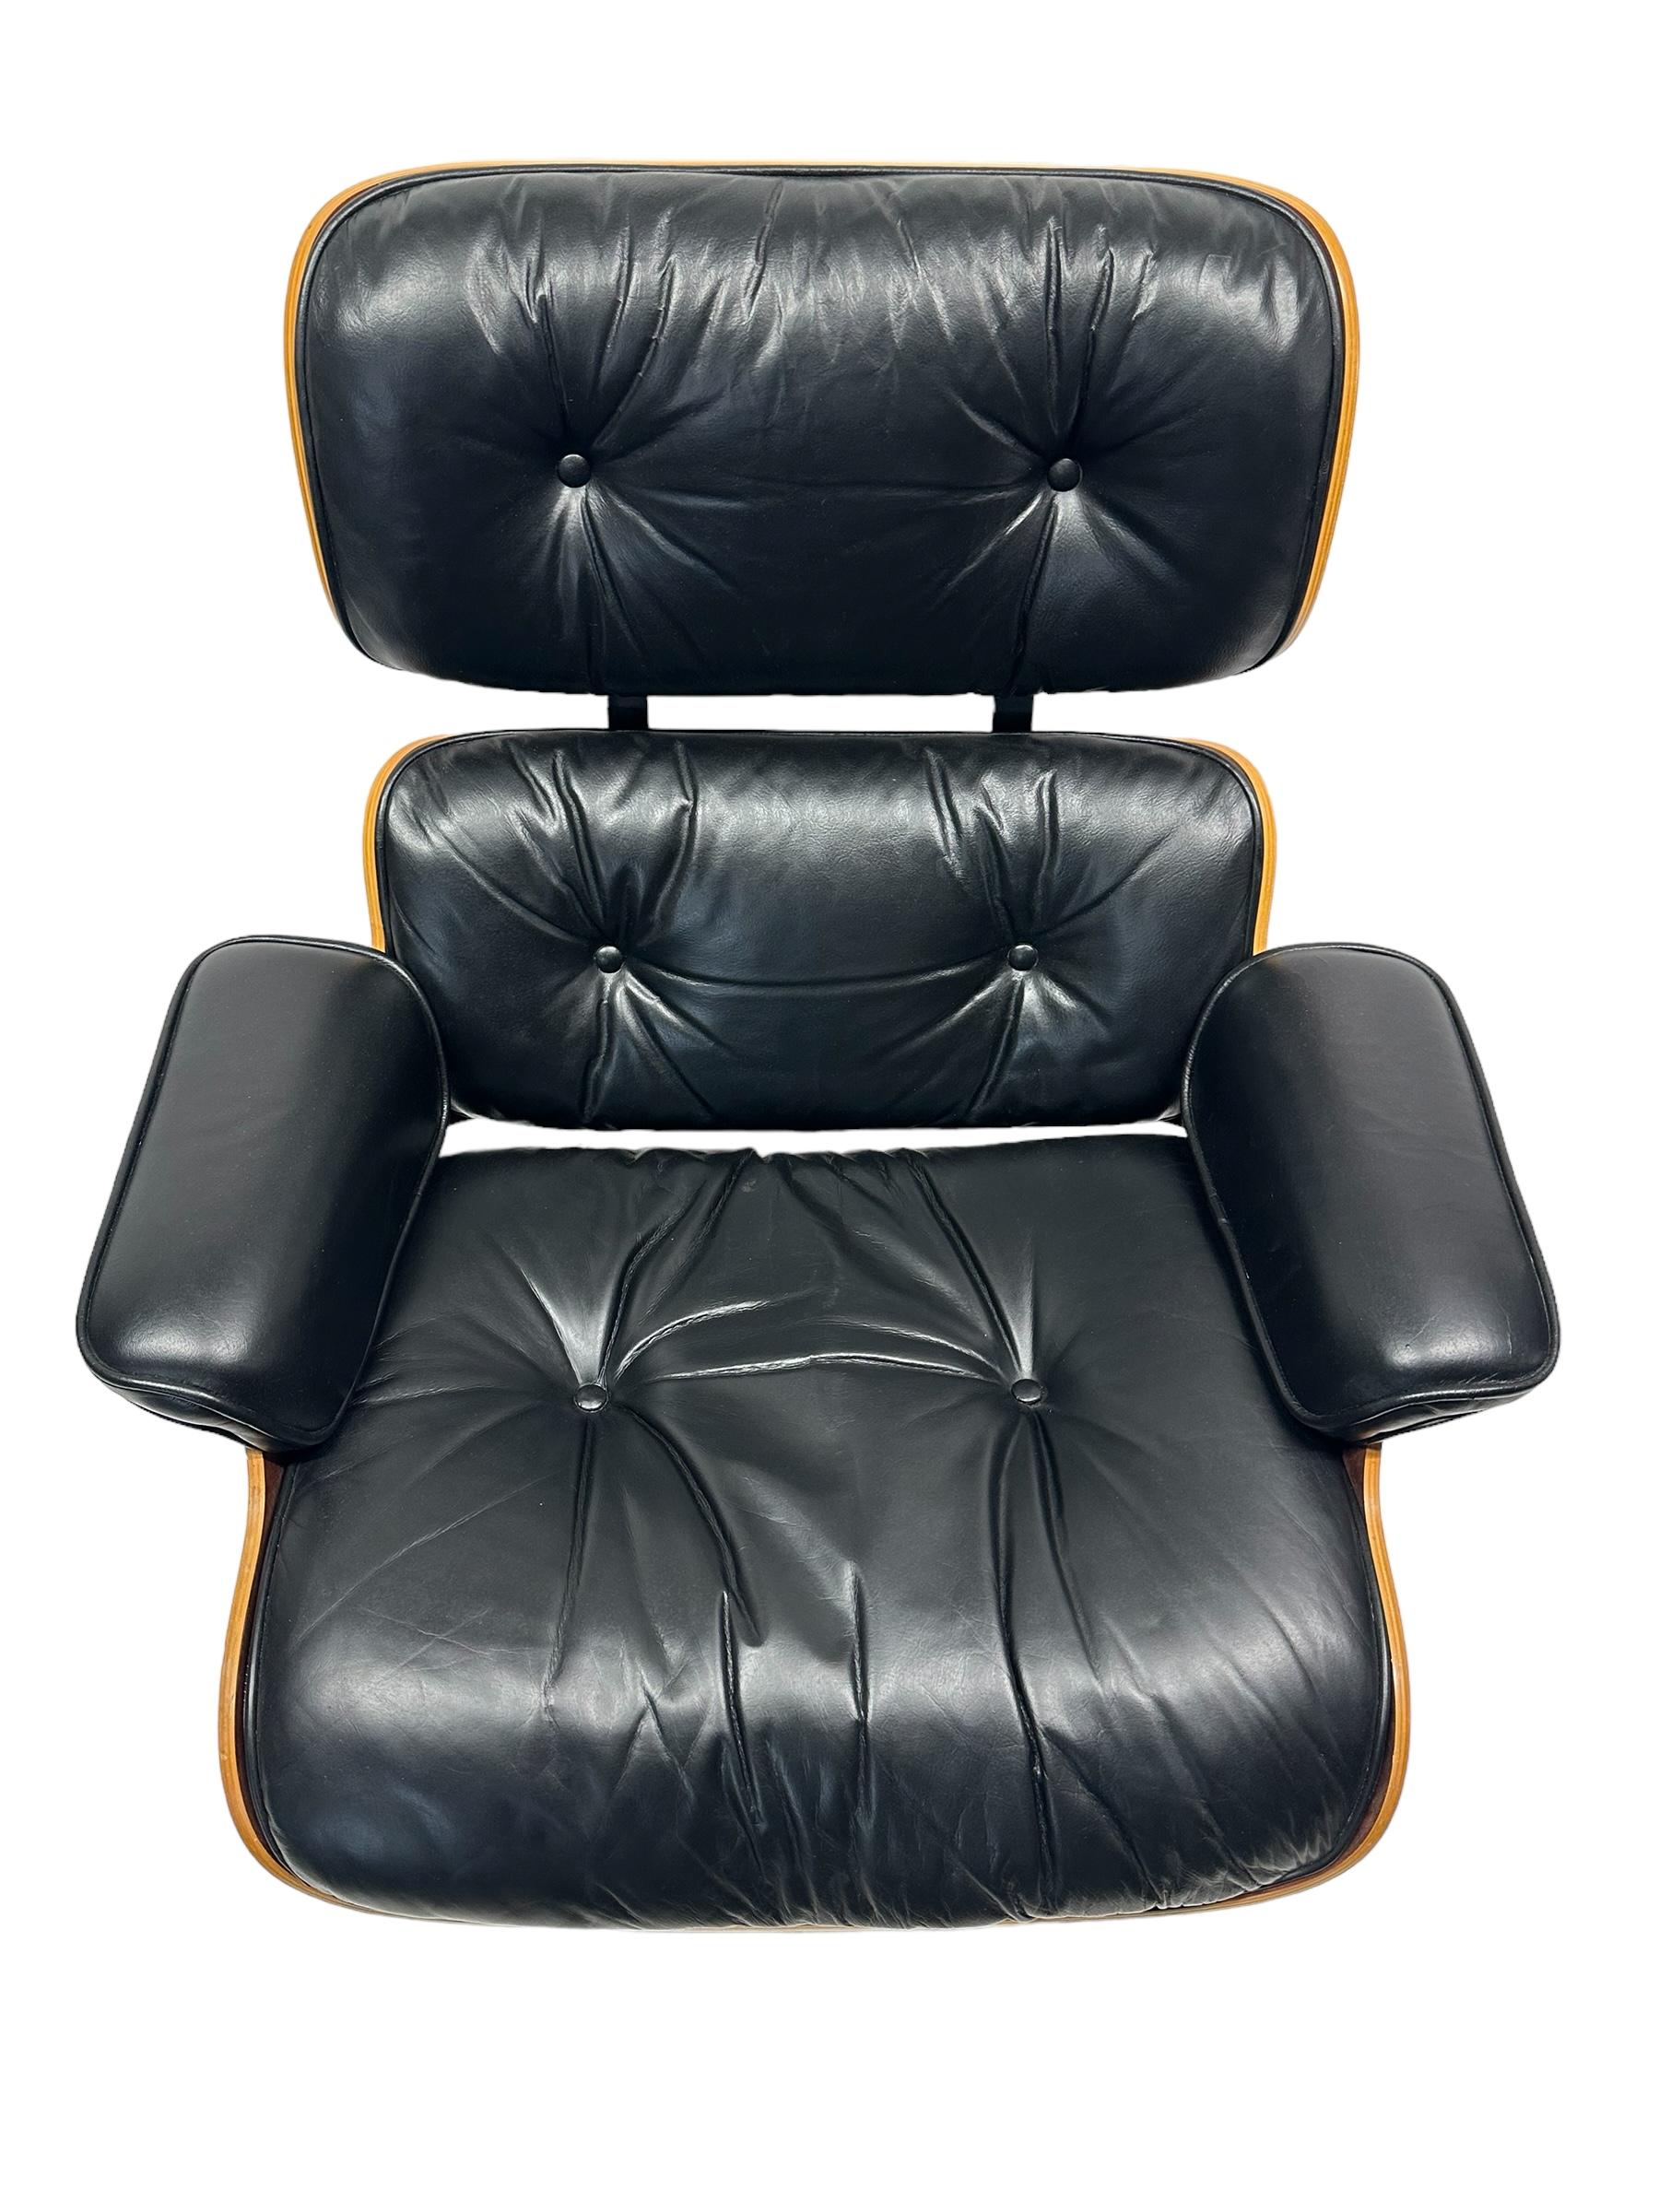 American Eames Lounge Chair and Ottoman 